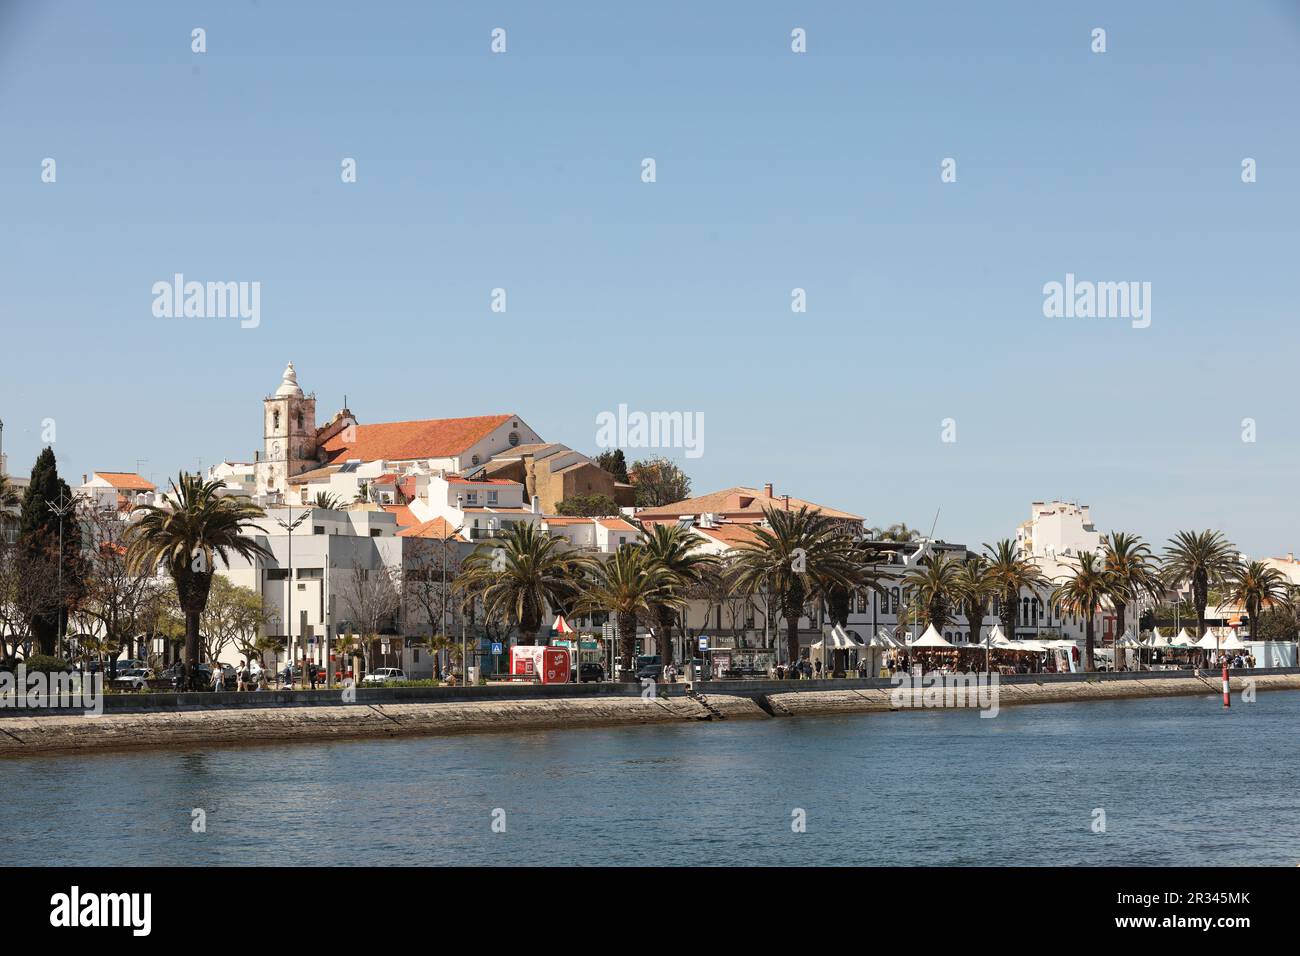 View of the Avenida and Old Town, Lagos, Algarve, Portugal Stock Photo